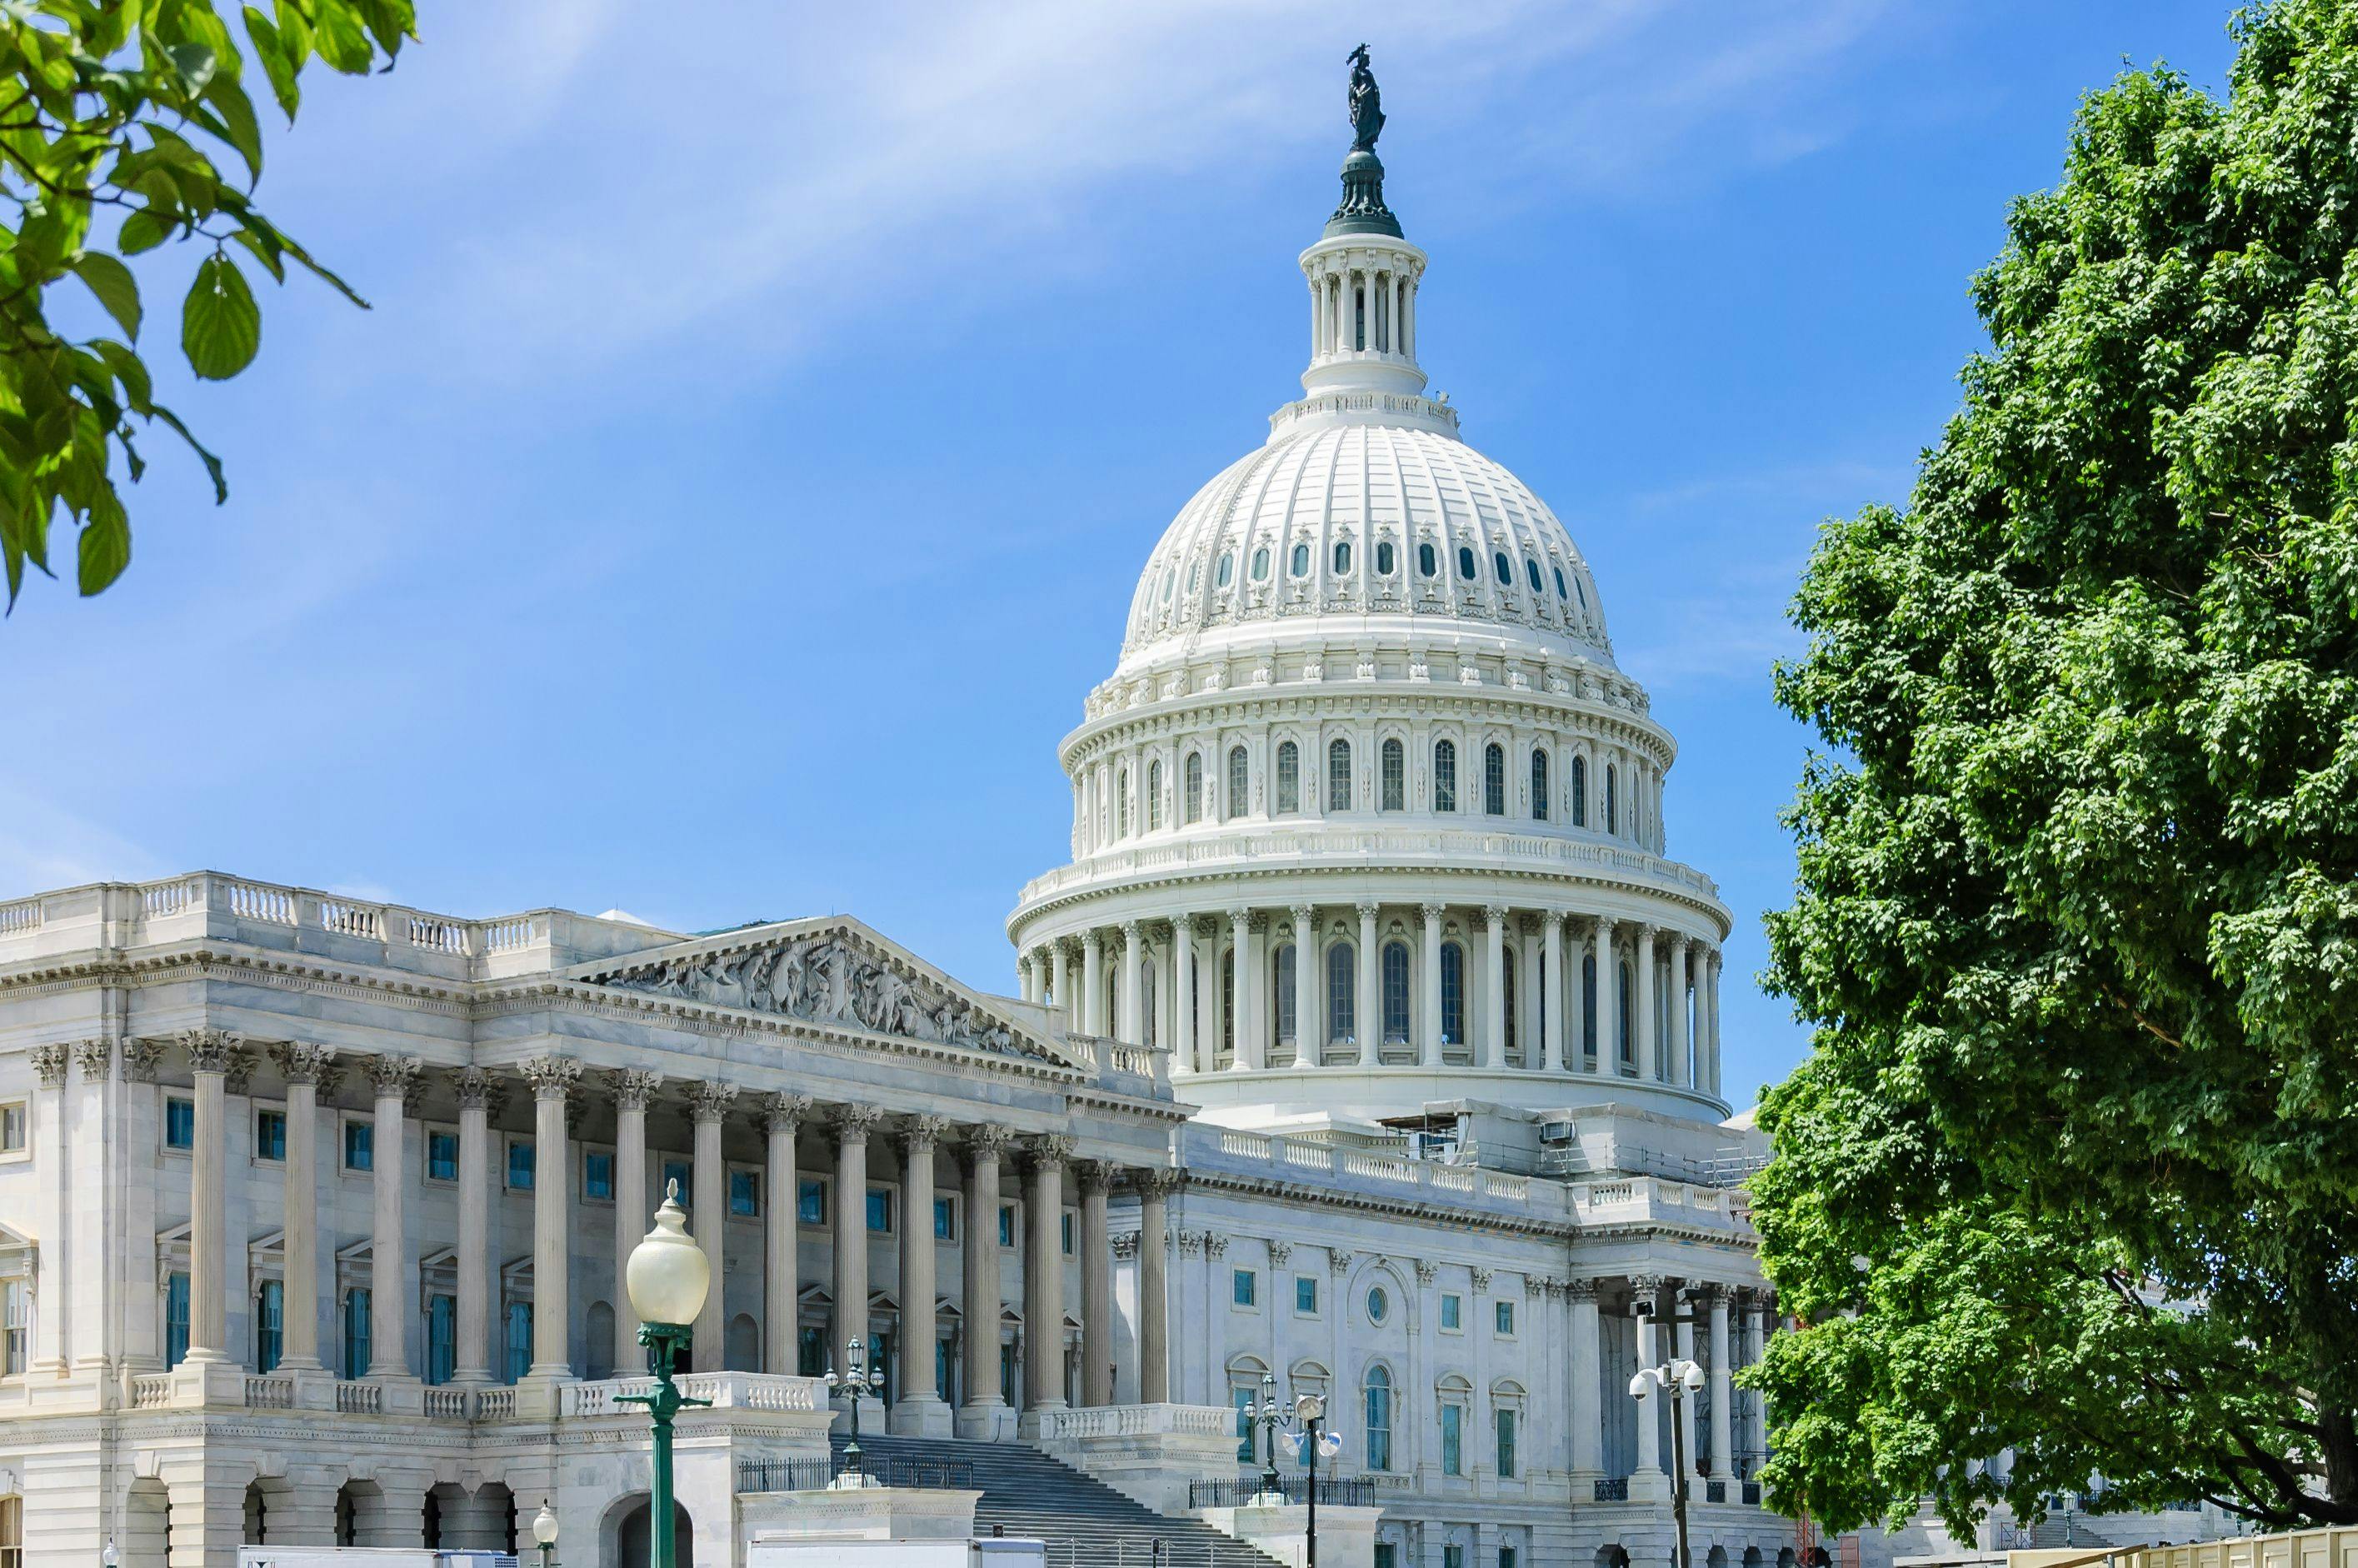 Some members in Congress have expressed growing interest in site-neutral policies. Hospitals say such policies could cost them billions. (Image credit: ©Pierrette Guertin - stock.adobe.com)